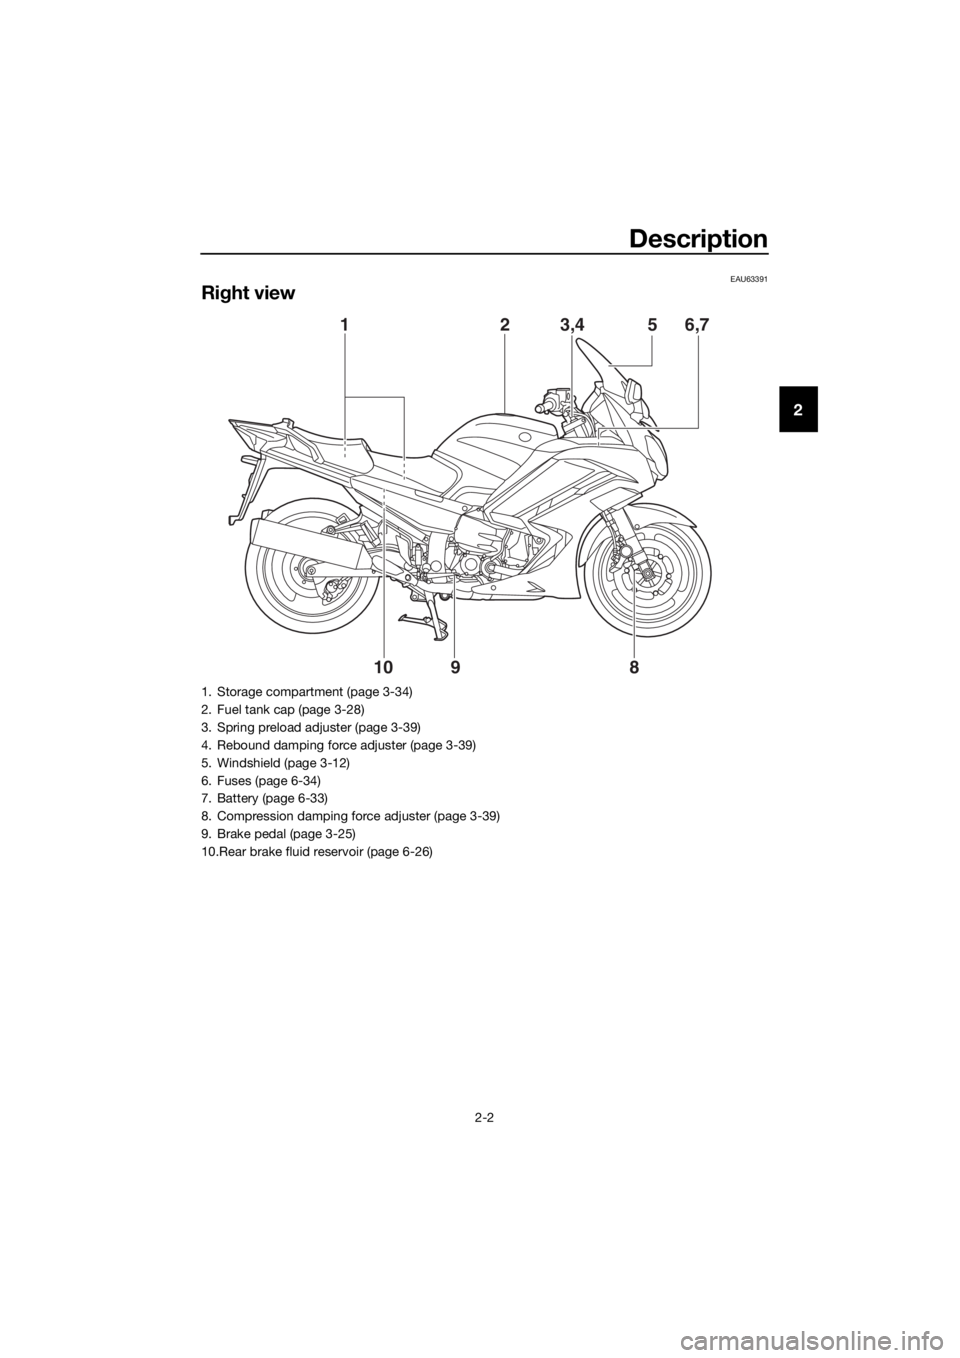 YAMAHA FJR1300A 2018  Owners Manual Description
2-2
2
EAU63391
Right view
8910 6,7
5
3,42
1
1. Storage compartment (page 3-34)
2. Fuel tank cap (page 3-28)
3. Spring preload adjuster (page 3-39)
4. Rebound damping force adjuster (page 3